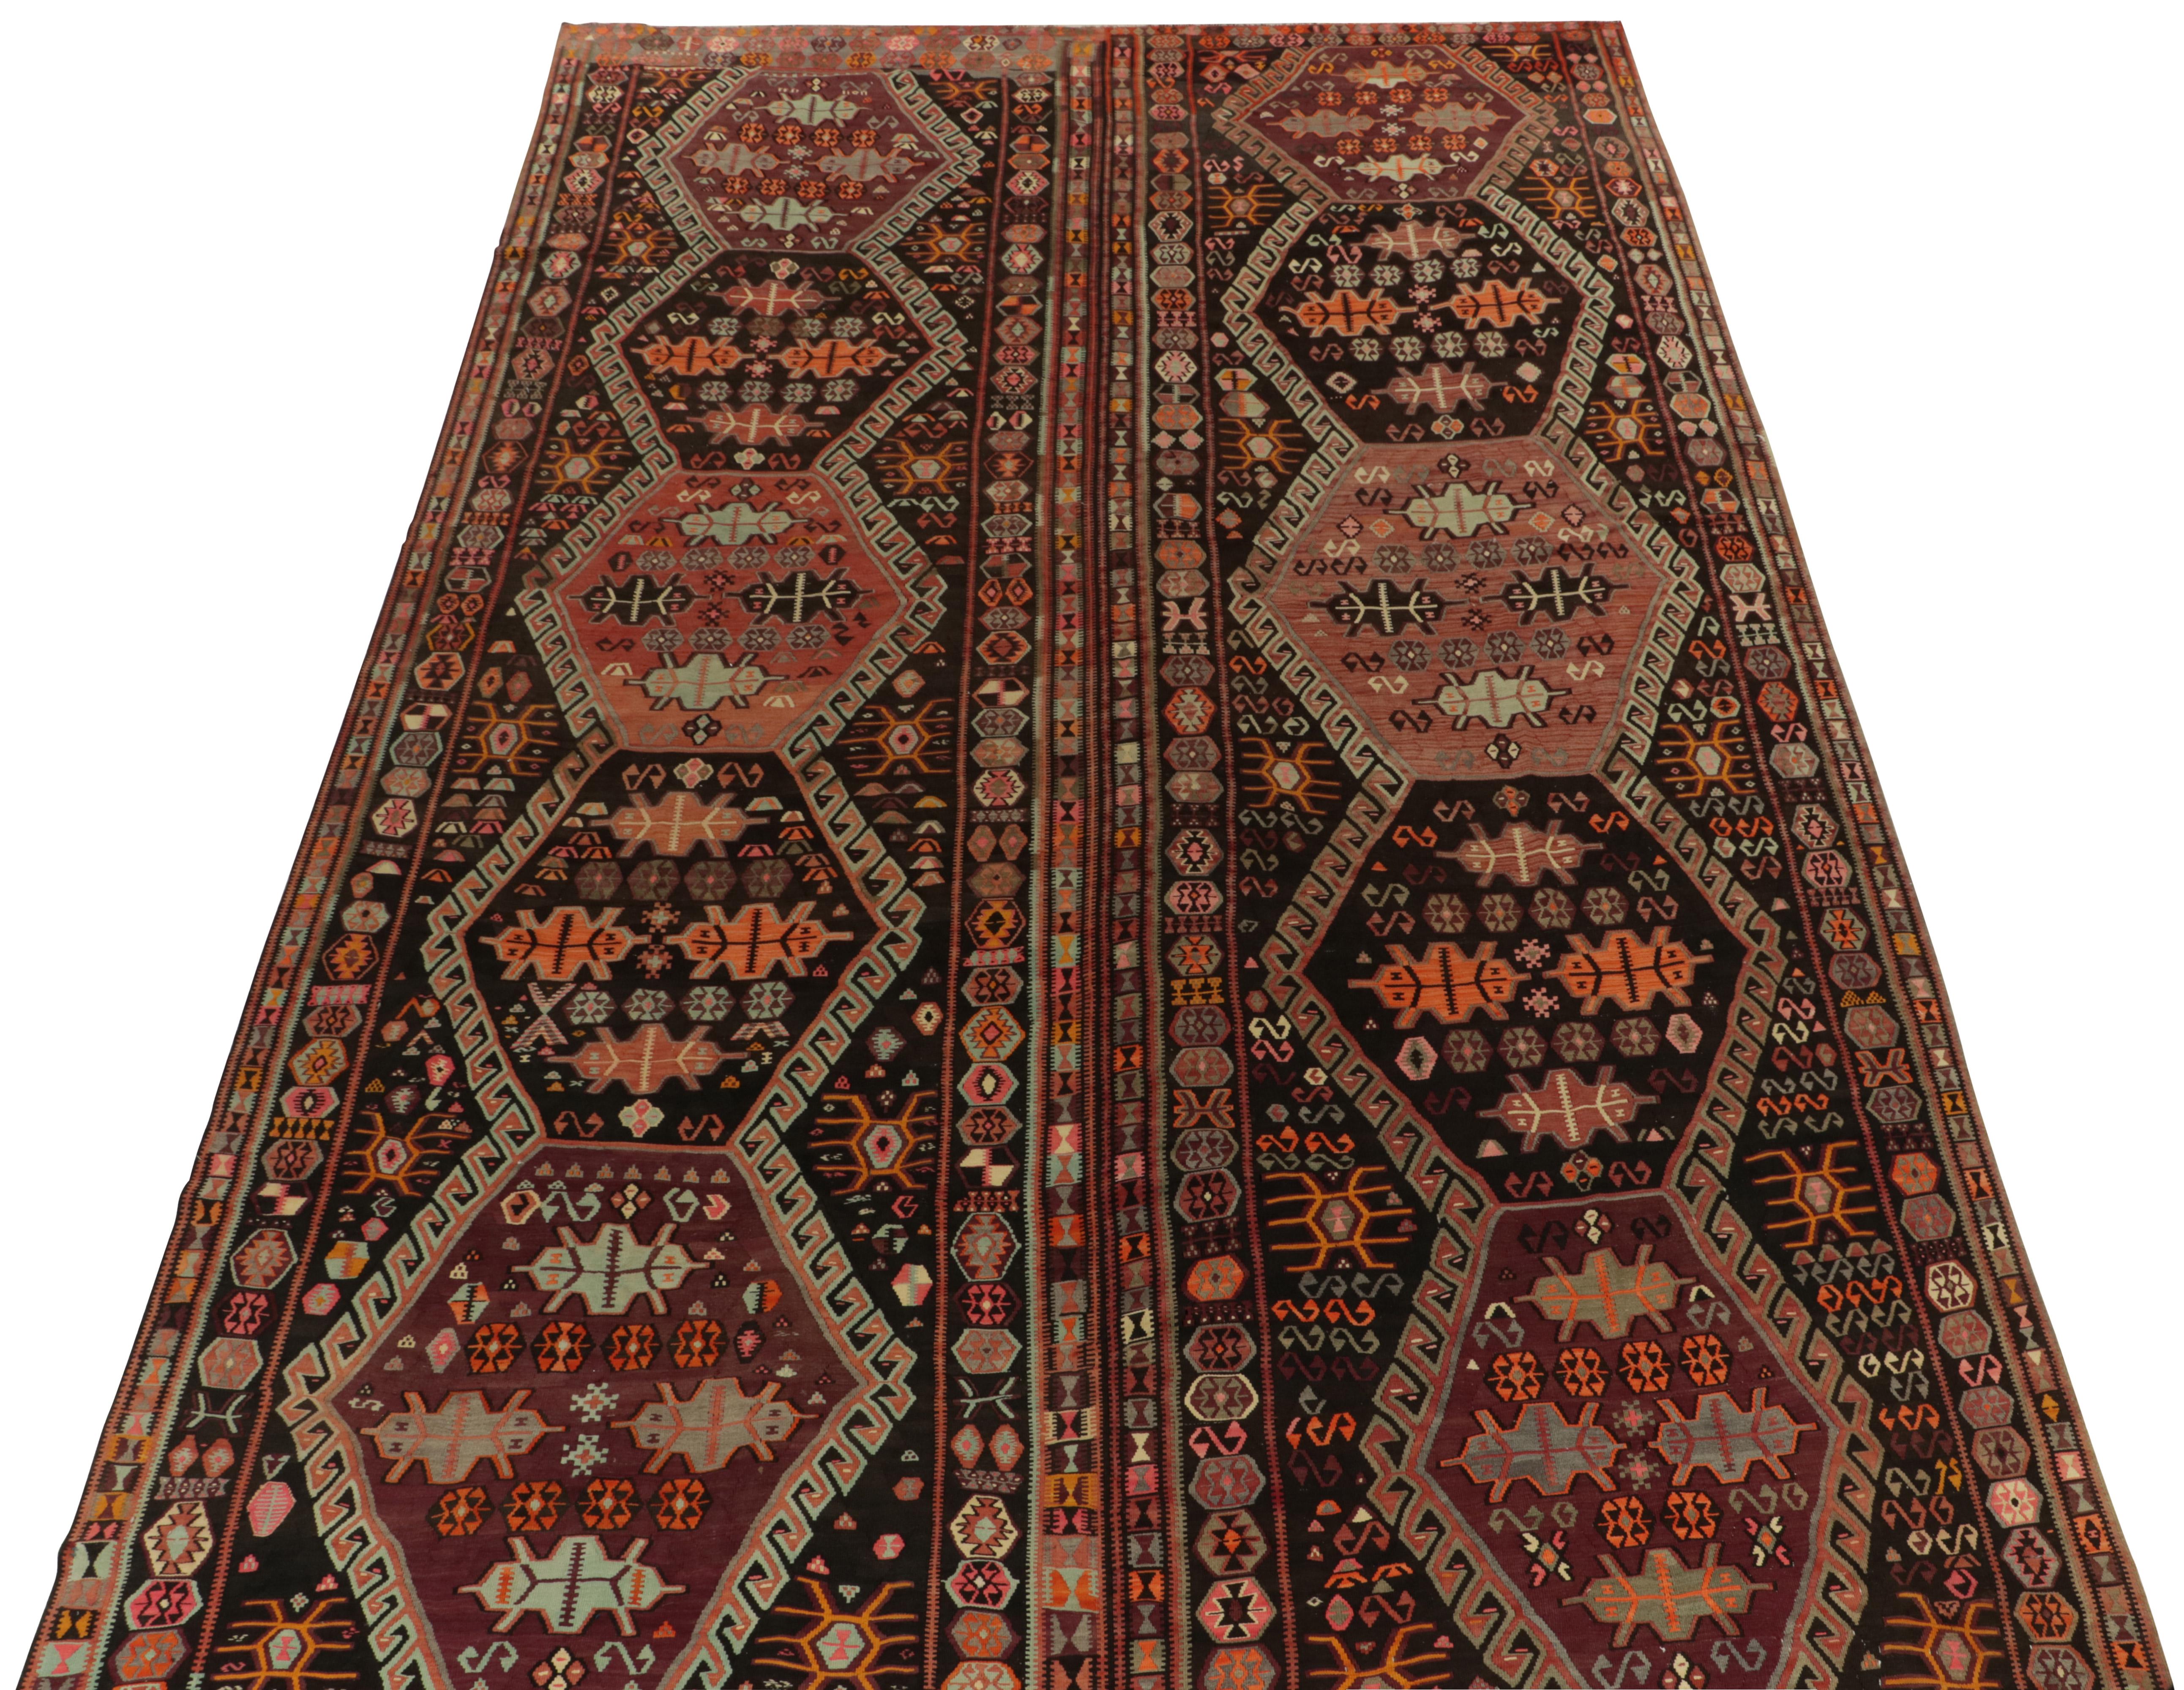 Originating from Turkey circa 1950-1960, an incredibly handwoven rare kilim rug from our vintage selections. Exclusive in the pagination of these refreshing hues on the richest brown, almost black background with tangerine, salmon pink & blue